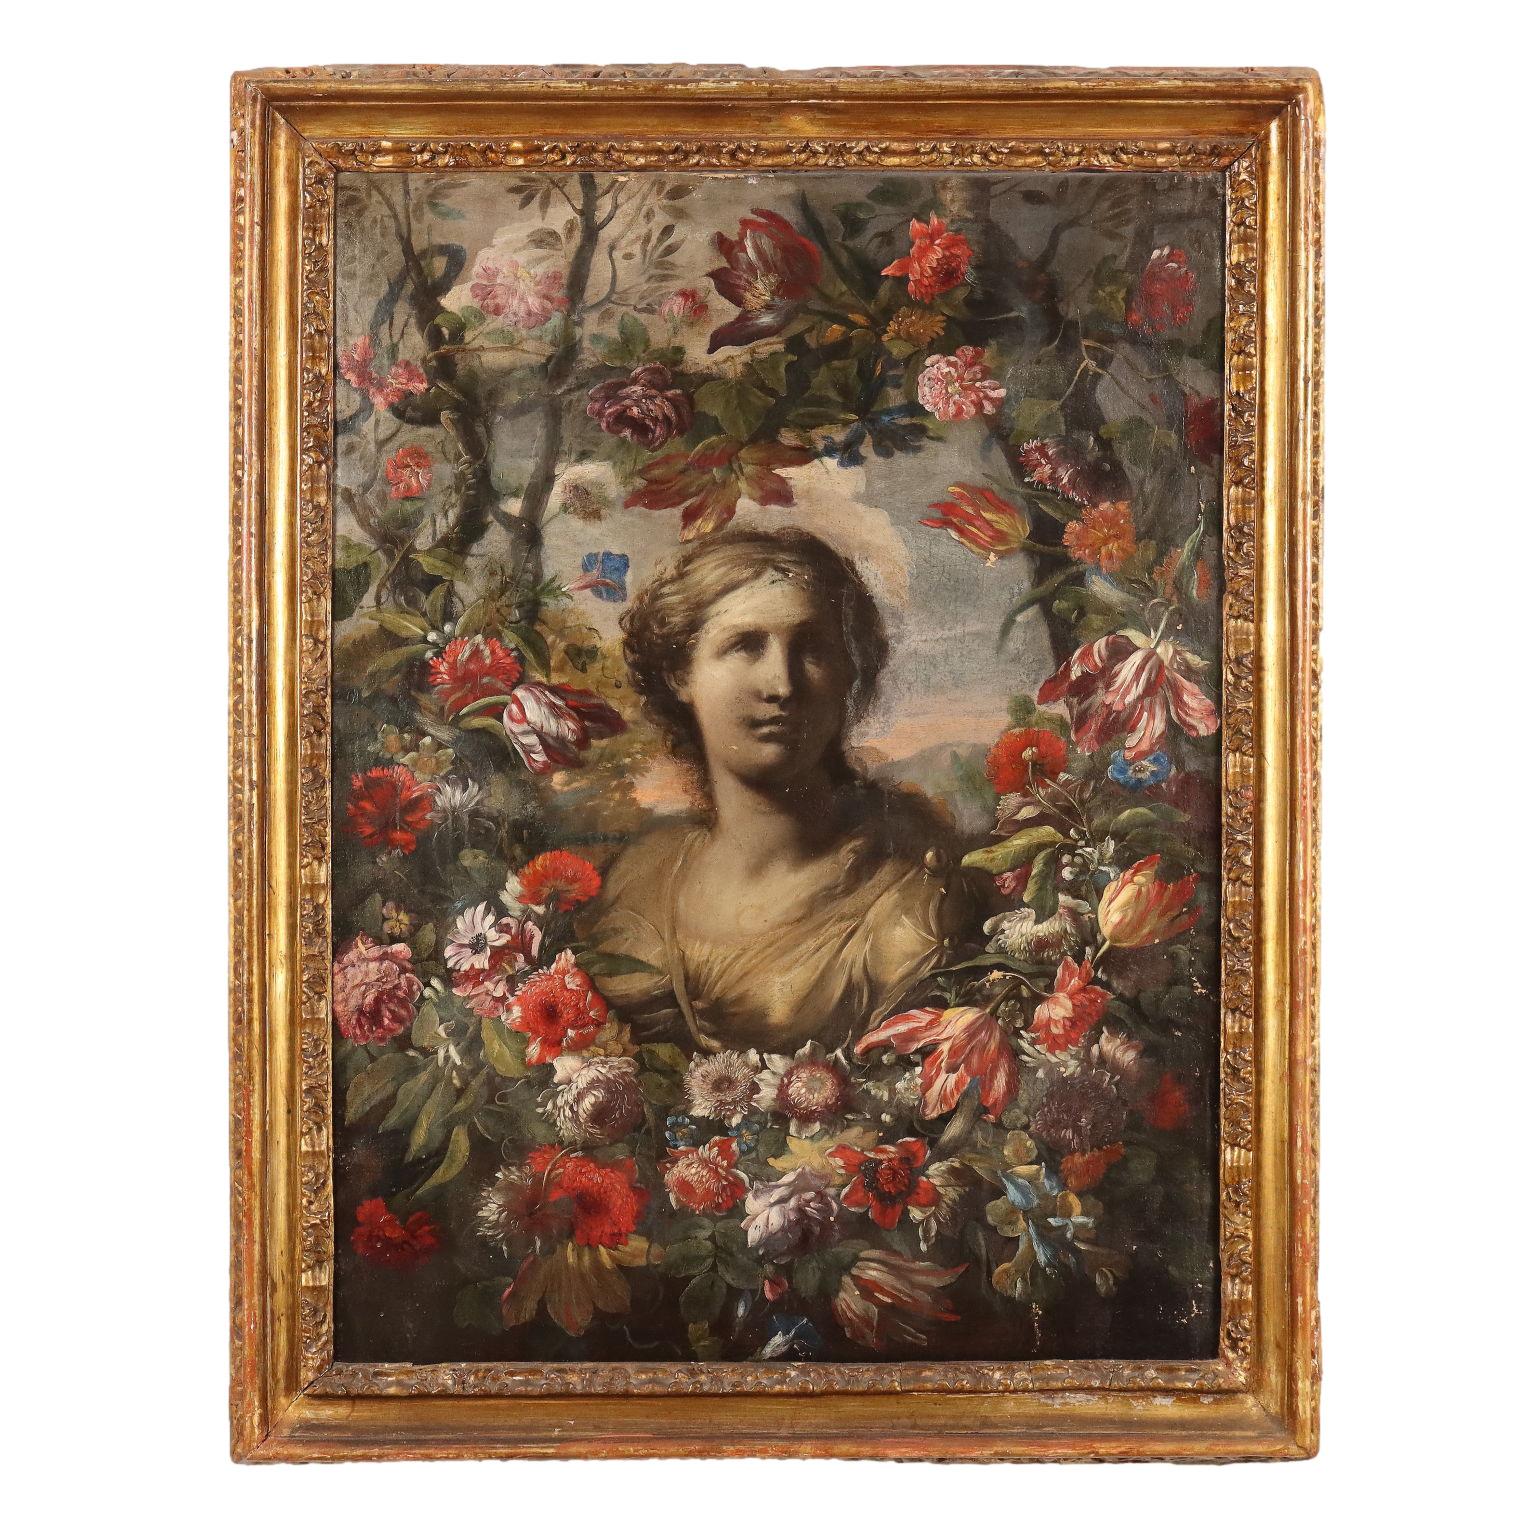 Unknown Figurative Painting - Painting with Female Bust with Flower Garland, late 17th, early 18th century